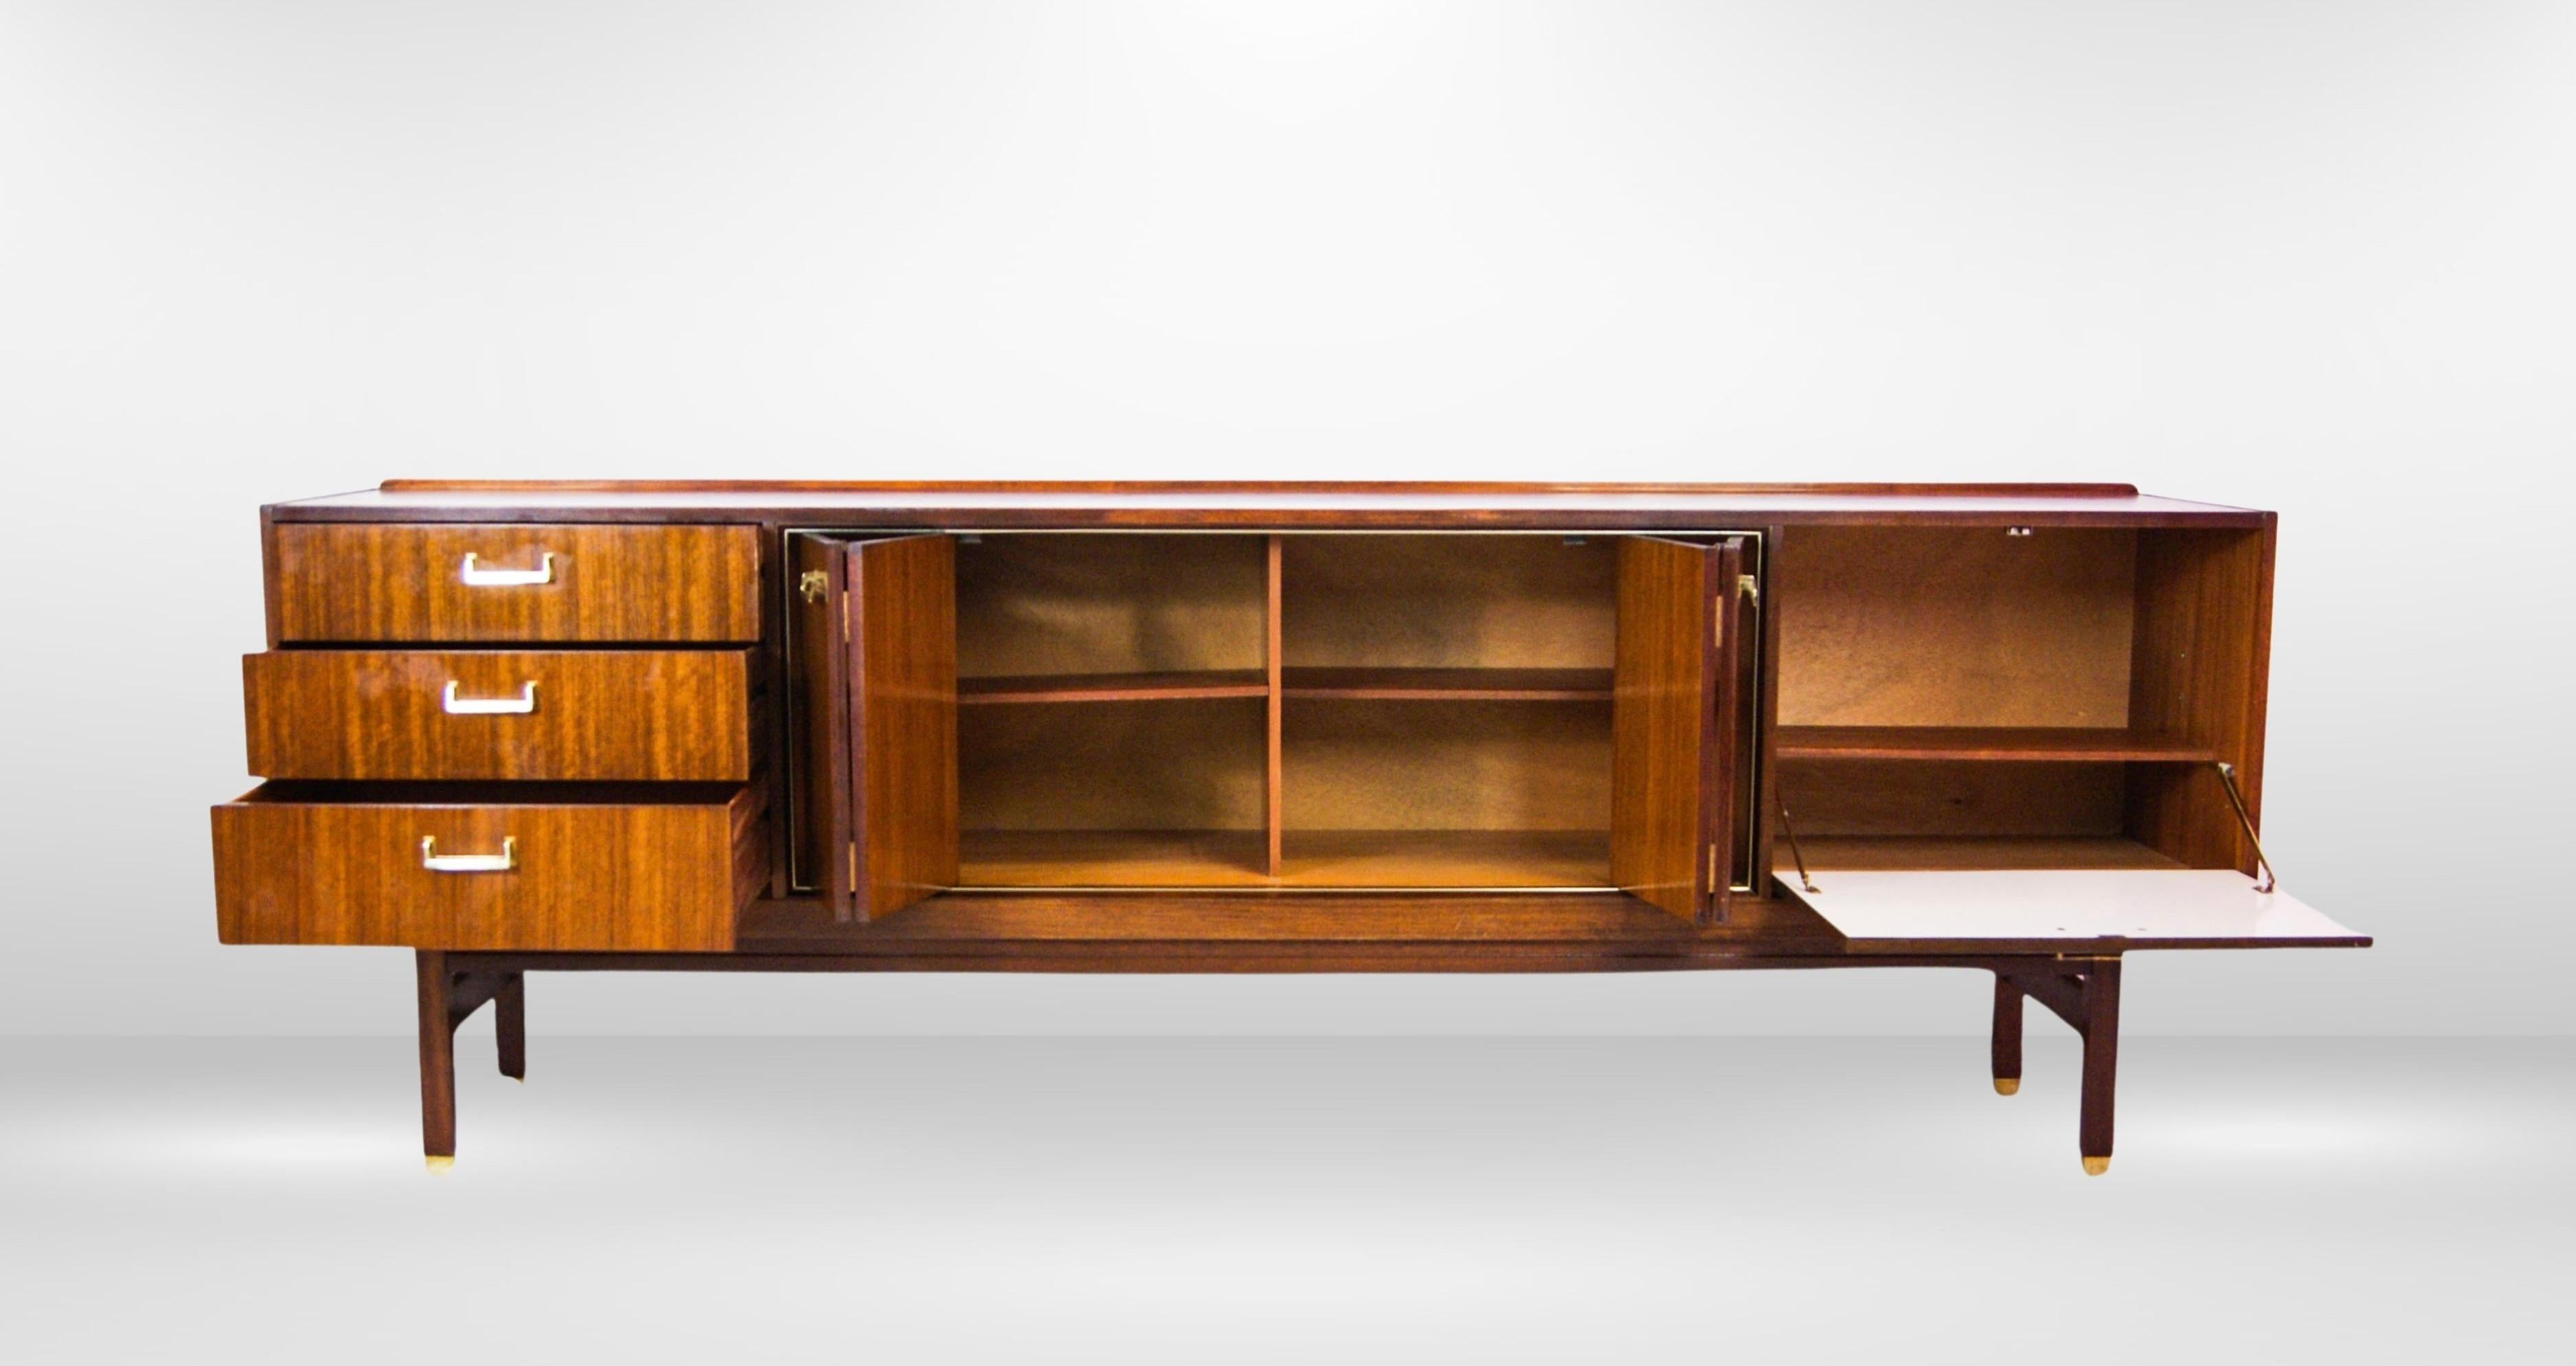 British Retro 1950s Long Teak Sideboard by E Gomme With Brass Handles & Concertina Doors For Sale